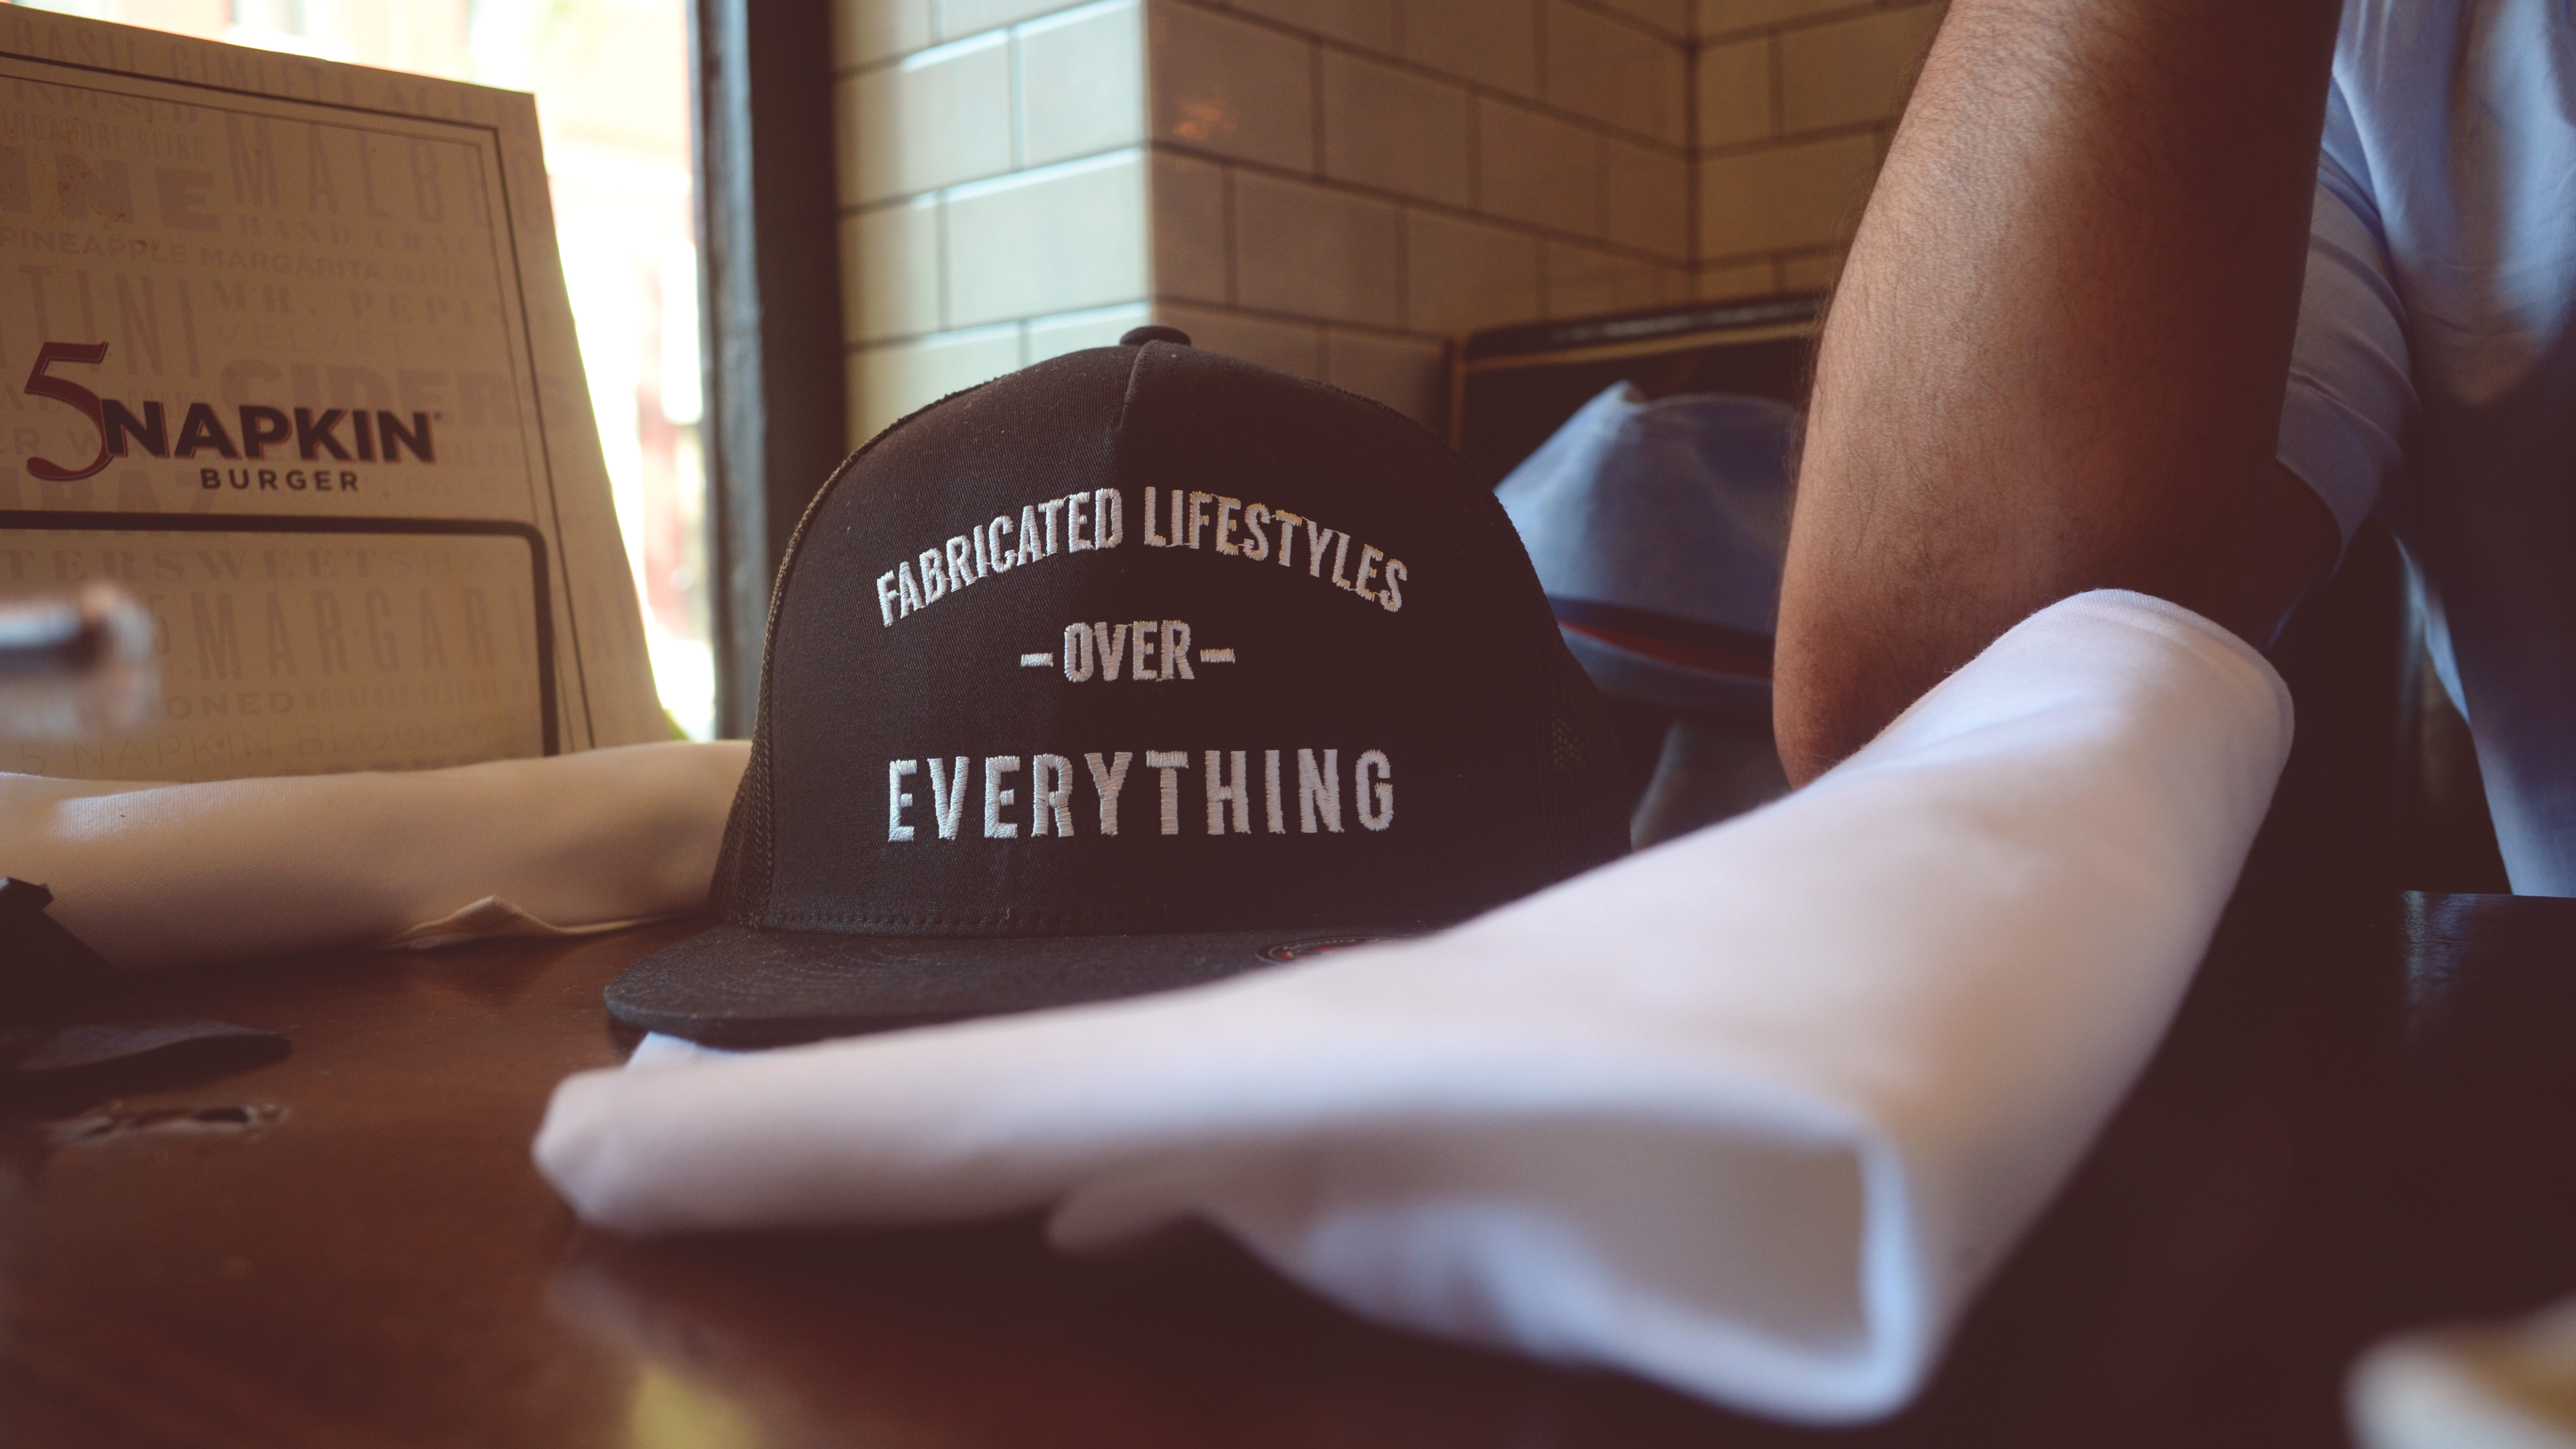 Fabricated Lifestyles High End Snapback